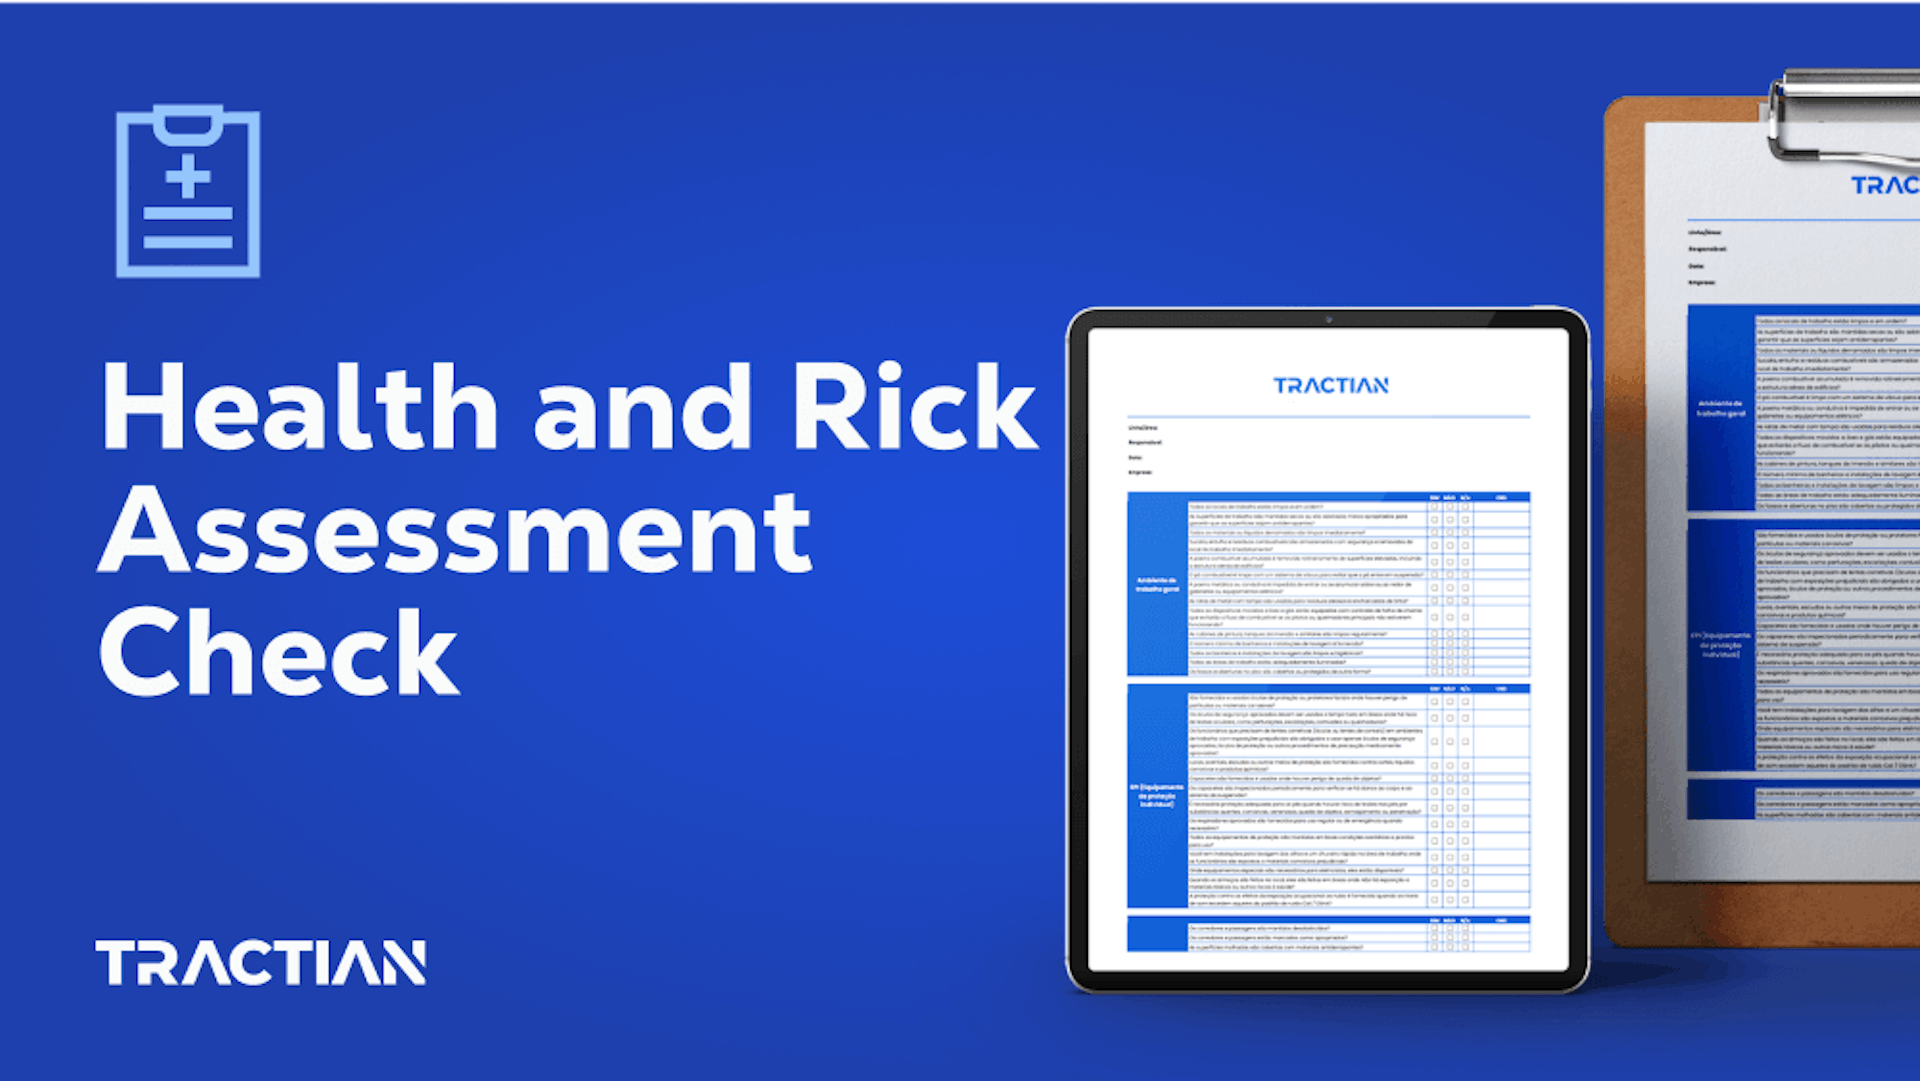 Health and Risk Assessment Check